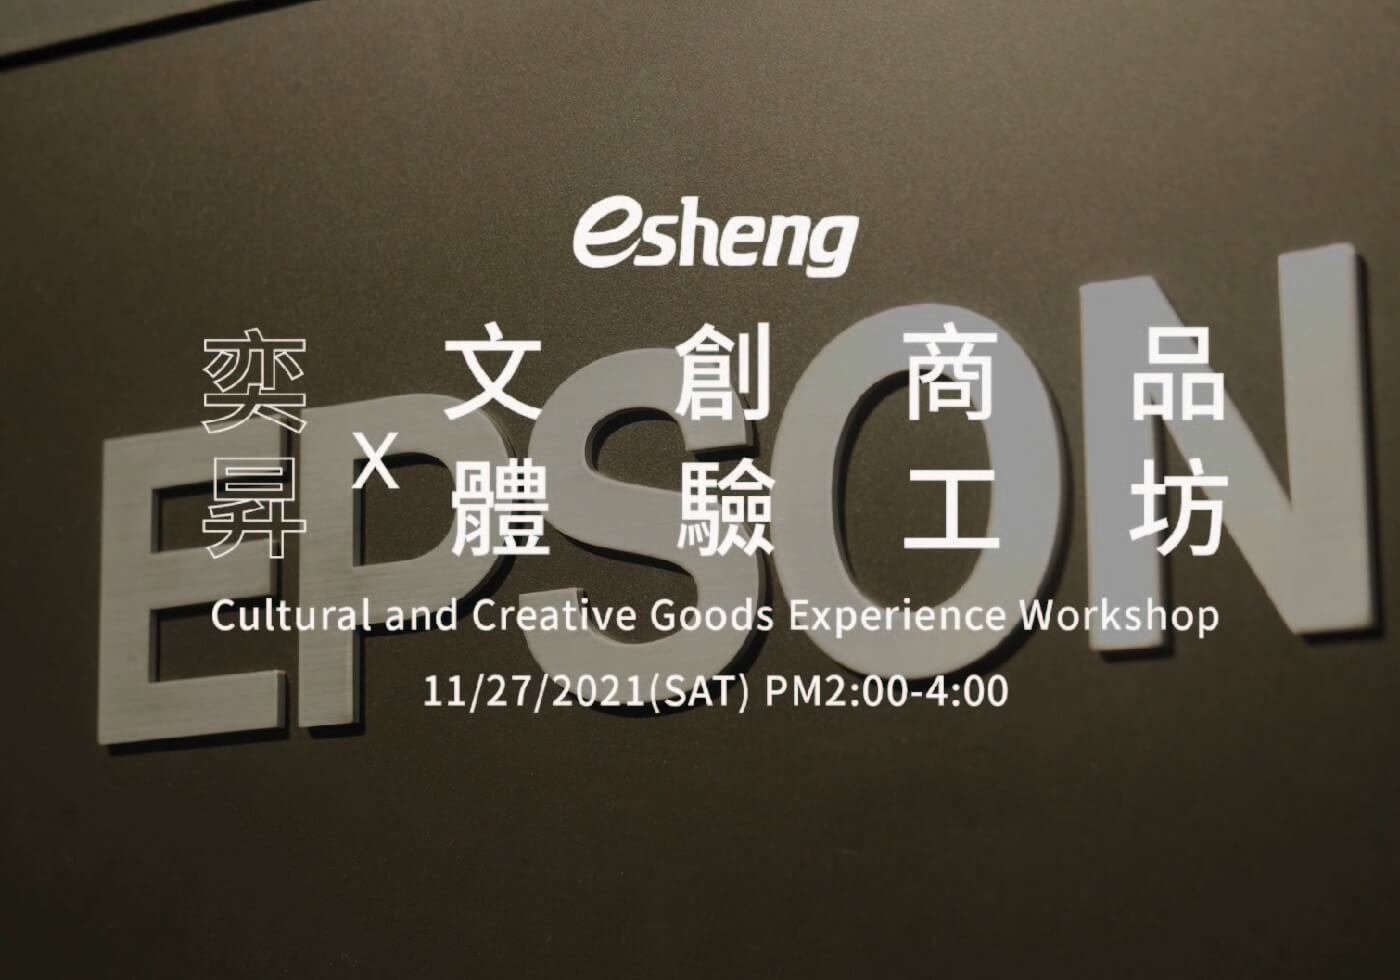 You are currently viewing Epson x 奕昇 文創商品體驗工坊